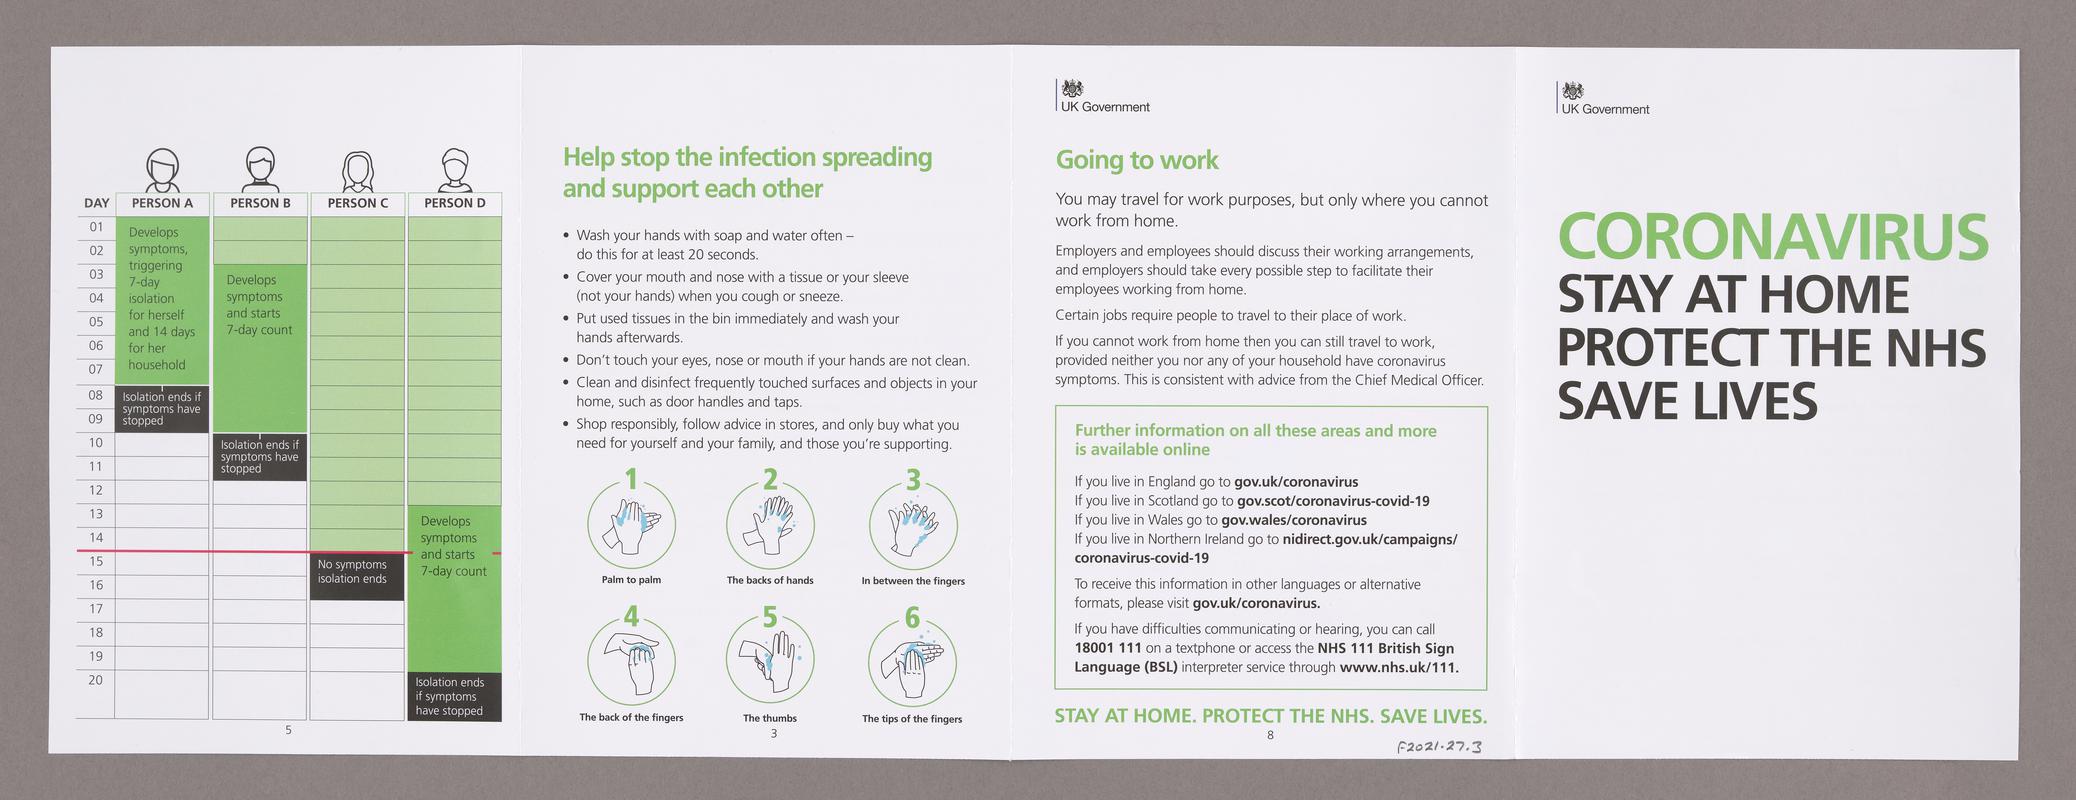 Leaflet 'Coronavirus Stay at Home Protect the NHS Save Lives', sent by UK Government to every UK household in April 2020.